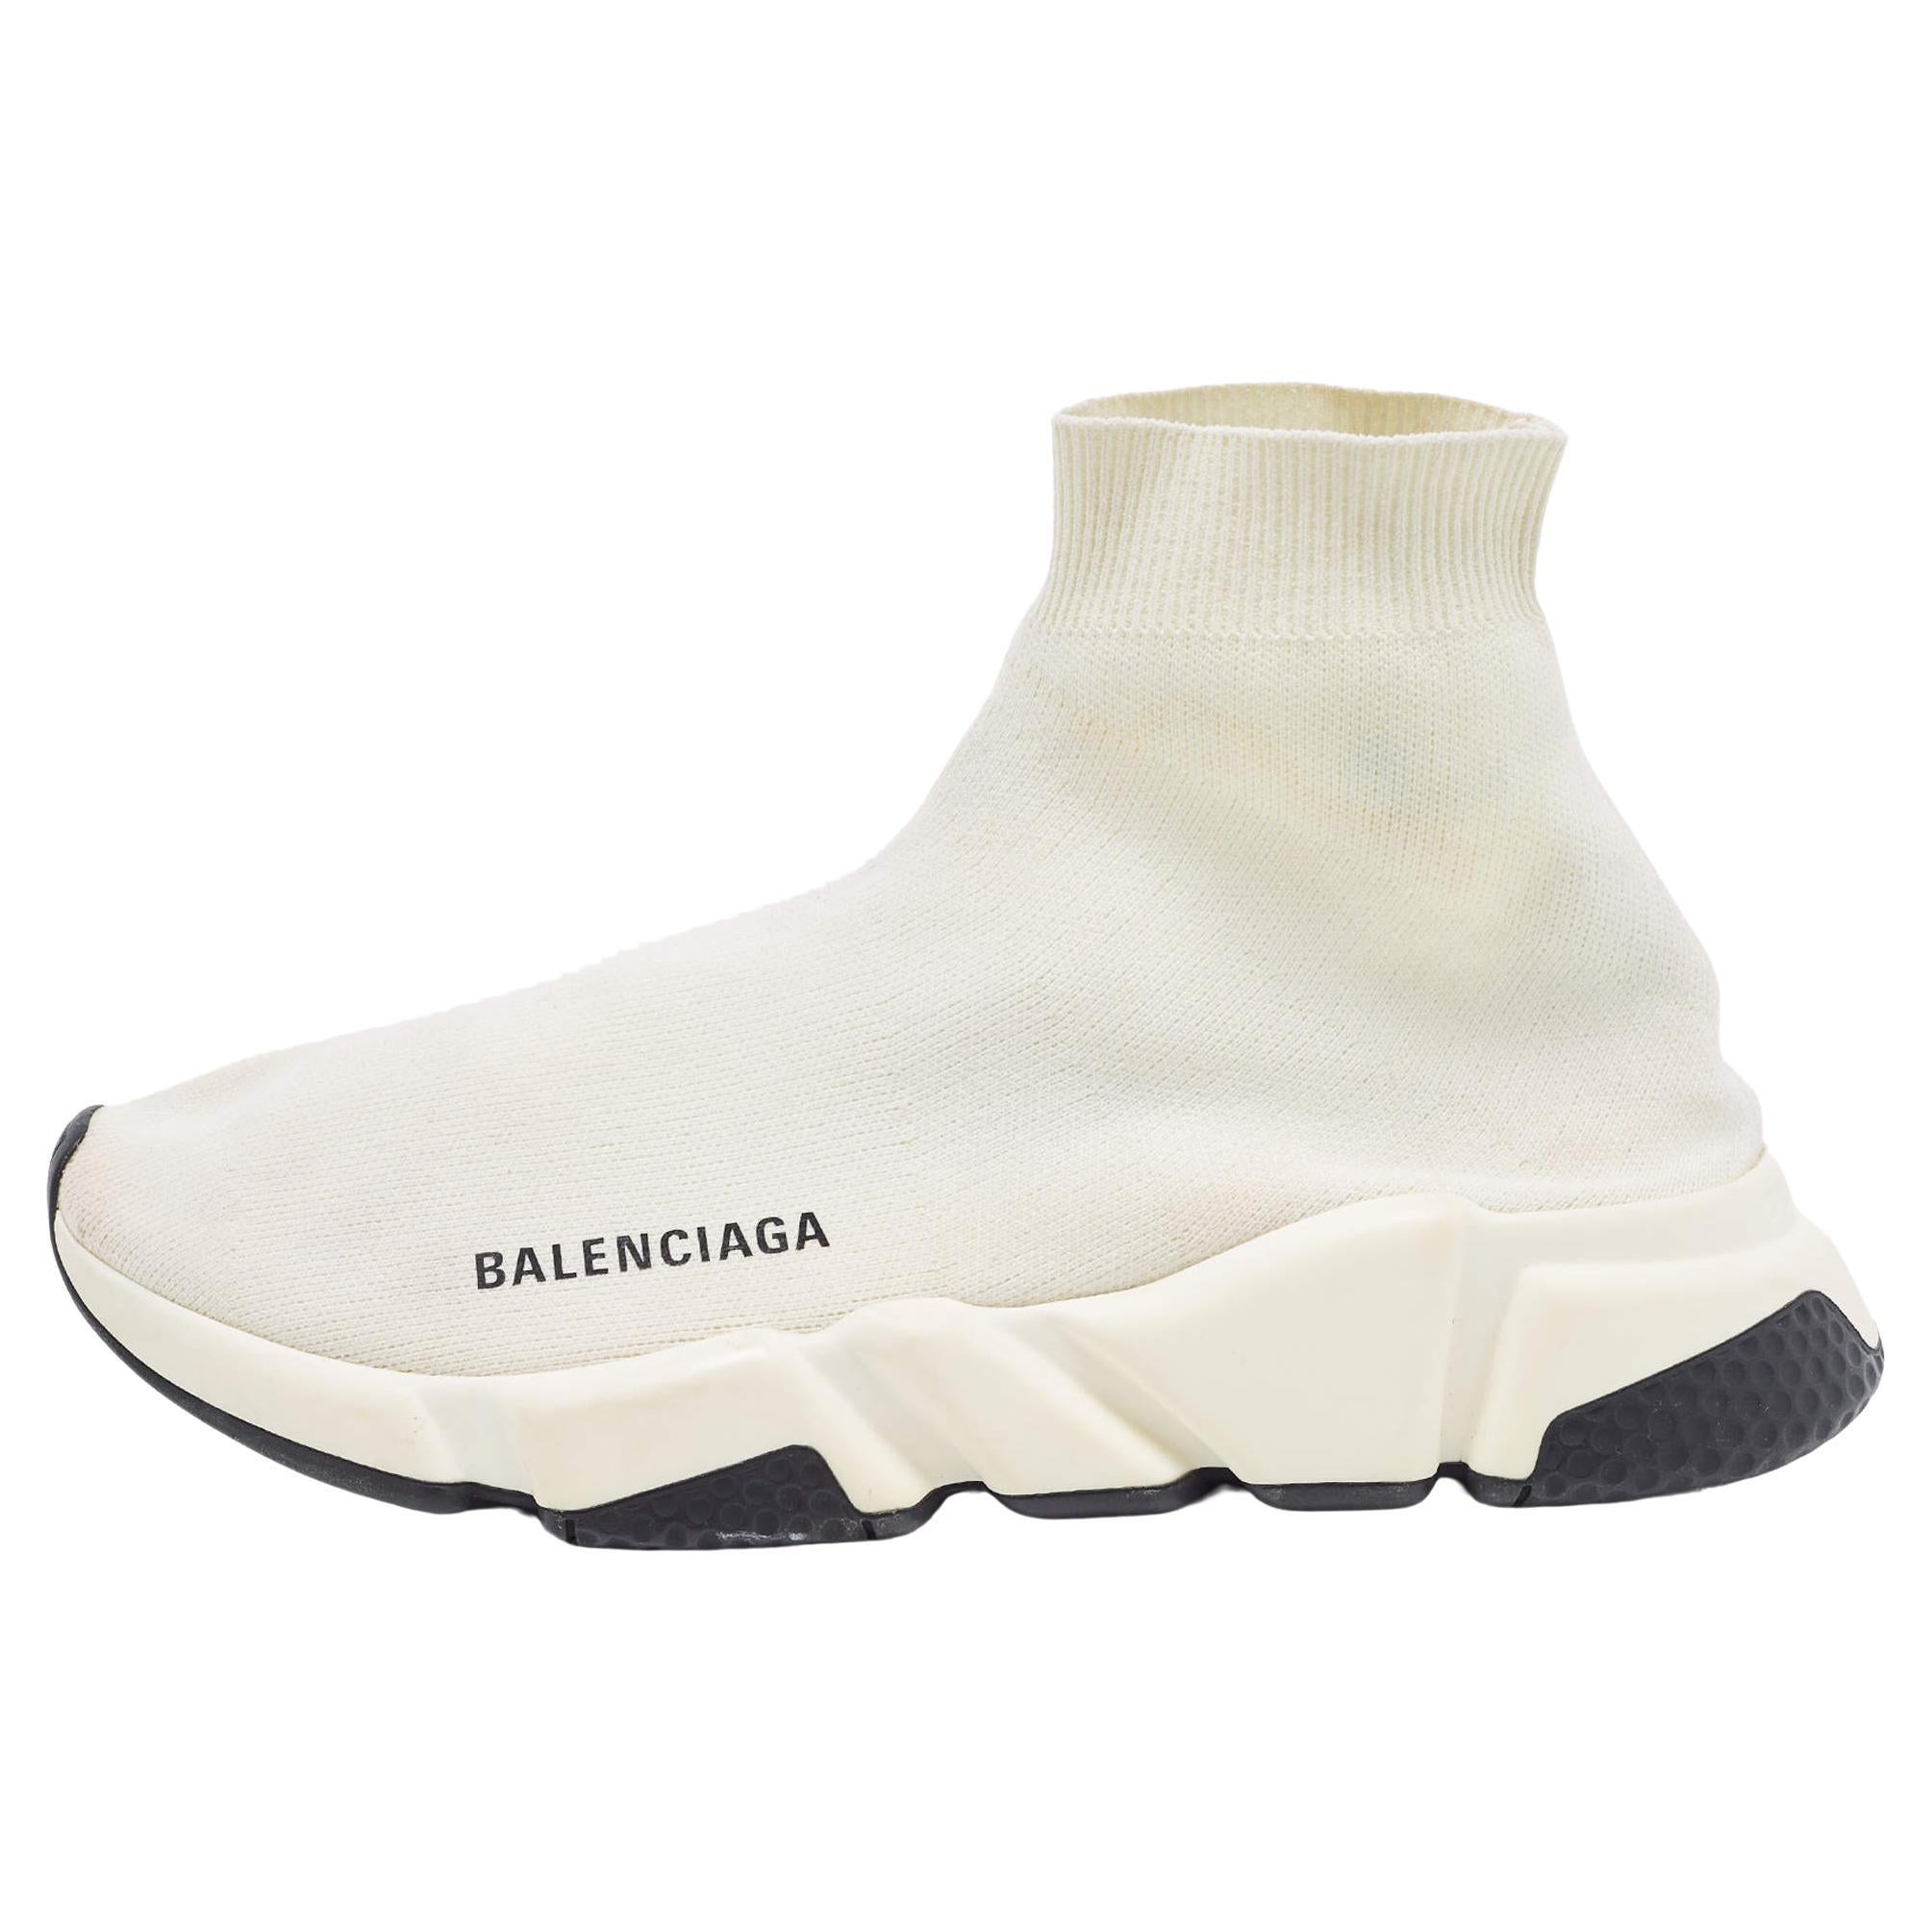 Balenciaga White Knit Fabric Speed High Top Sneakers Size 38 For Sale